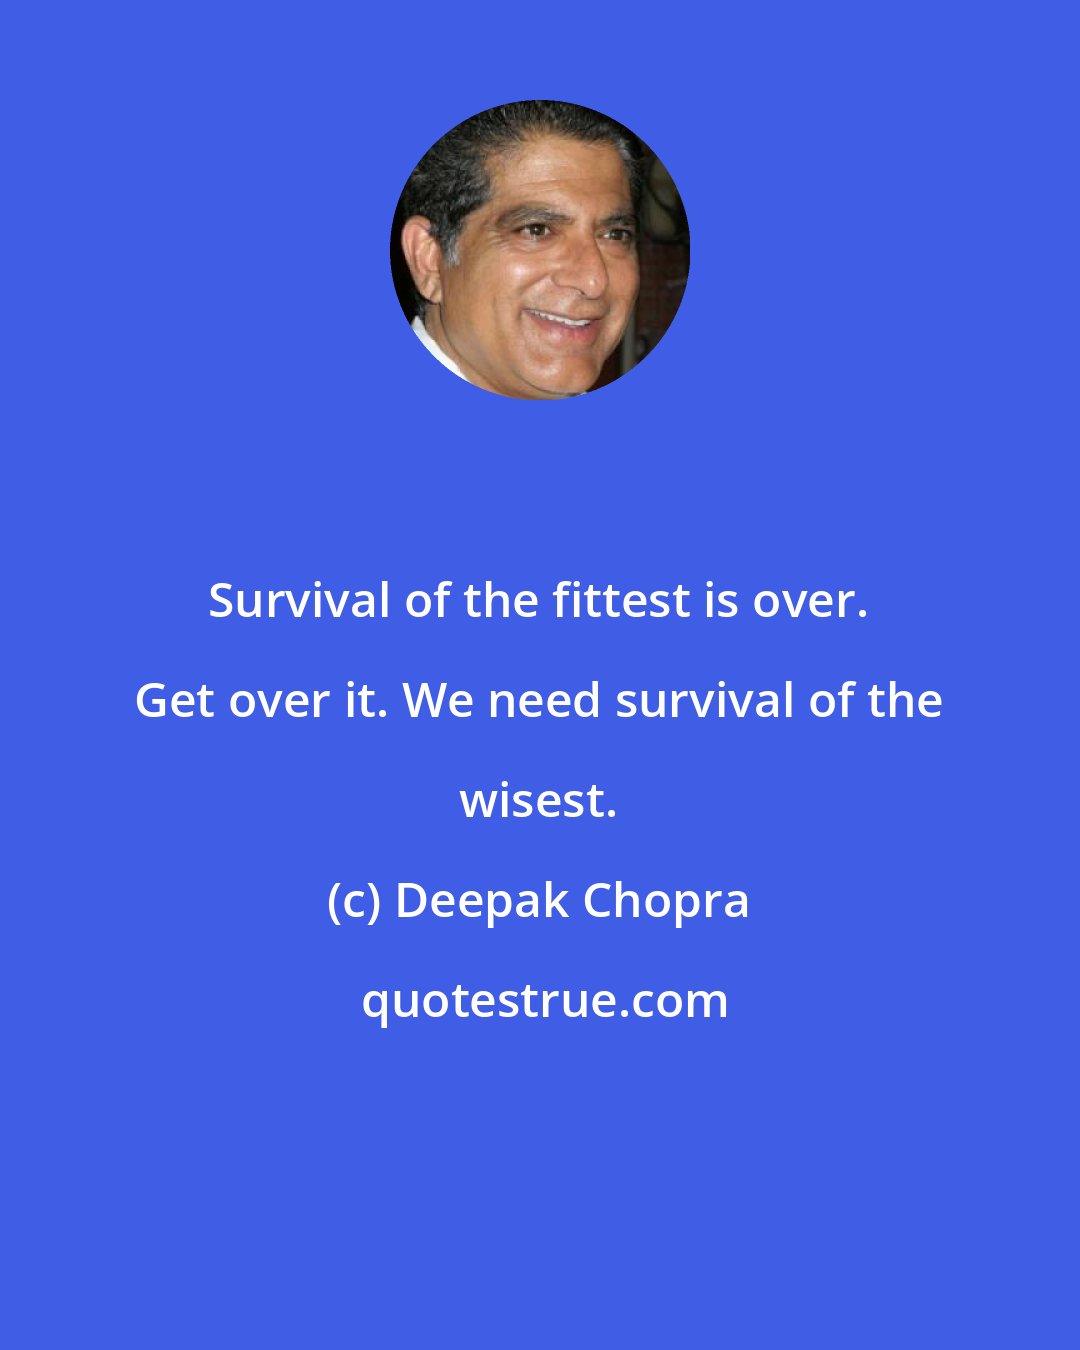 Deepak Chopra: Survival of the fittest is over. Get over it. We need survival of the wisest.